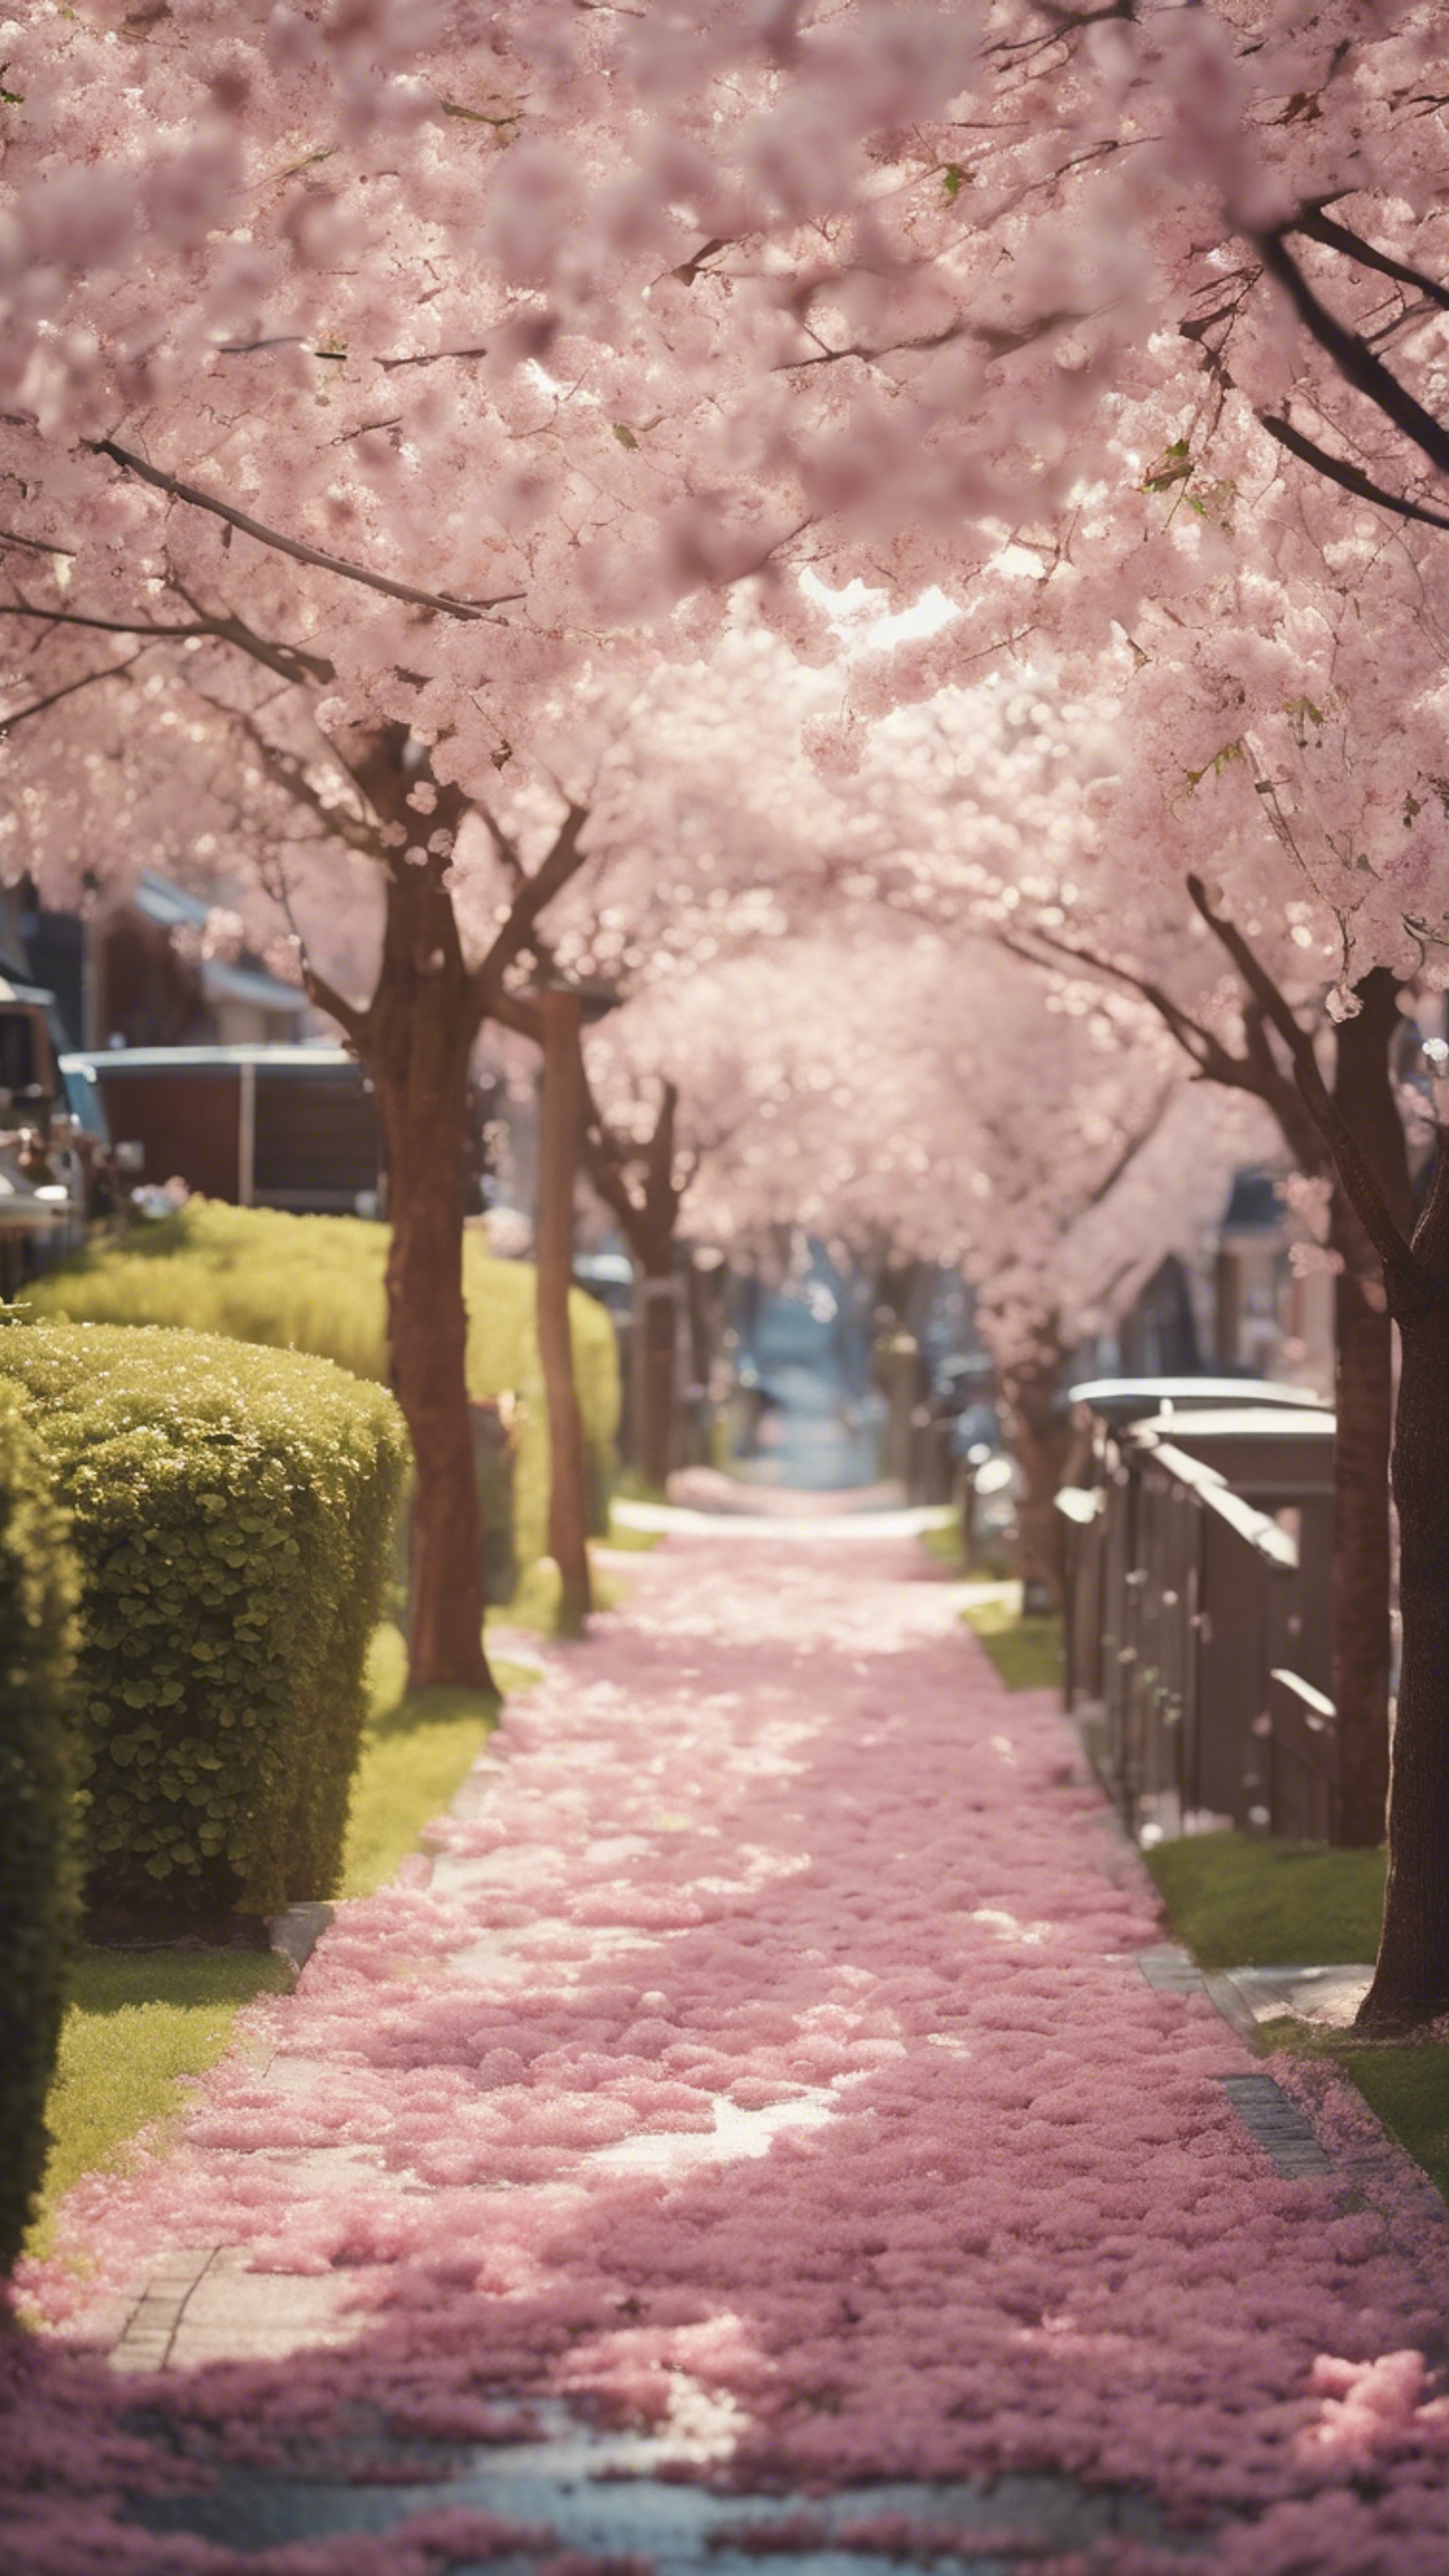 A suburban street lined with houses, and cherry blossom trees showering the pathway with petals, giving an ethereal feel to a sunny spring morning. Hình nền[d085be0bf6ea43718843]